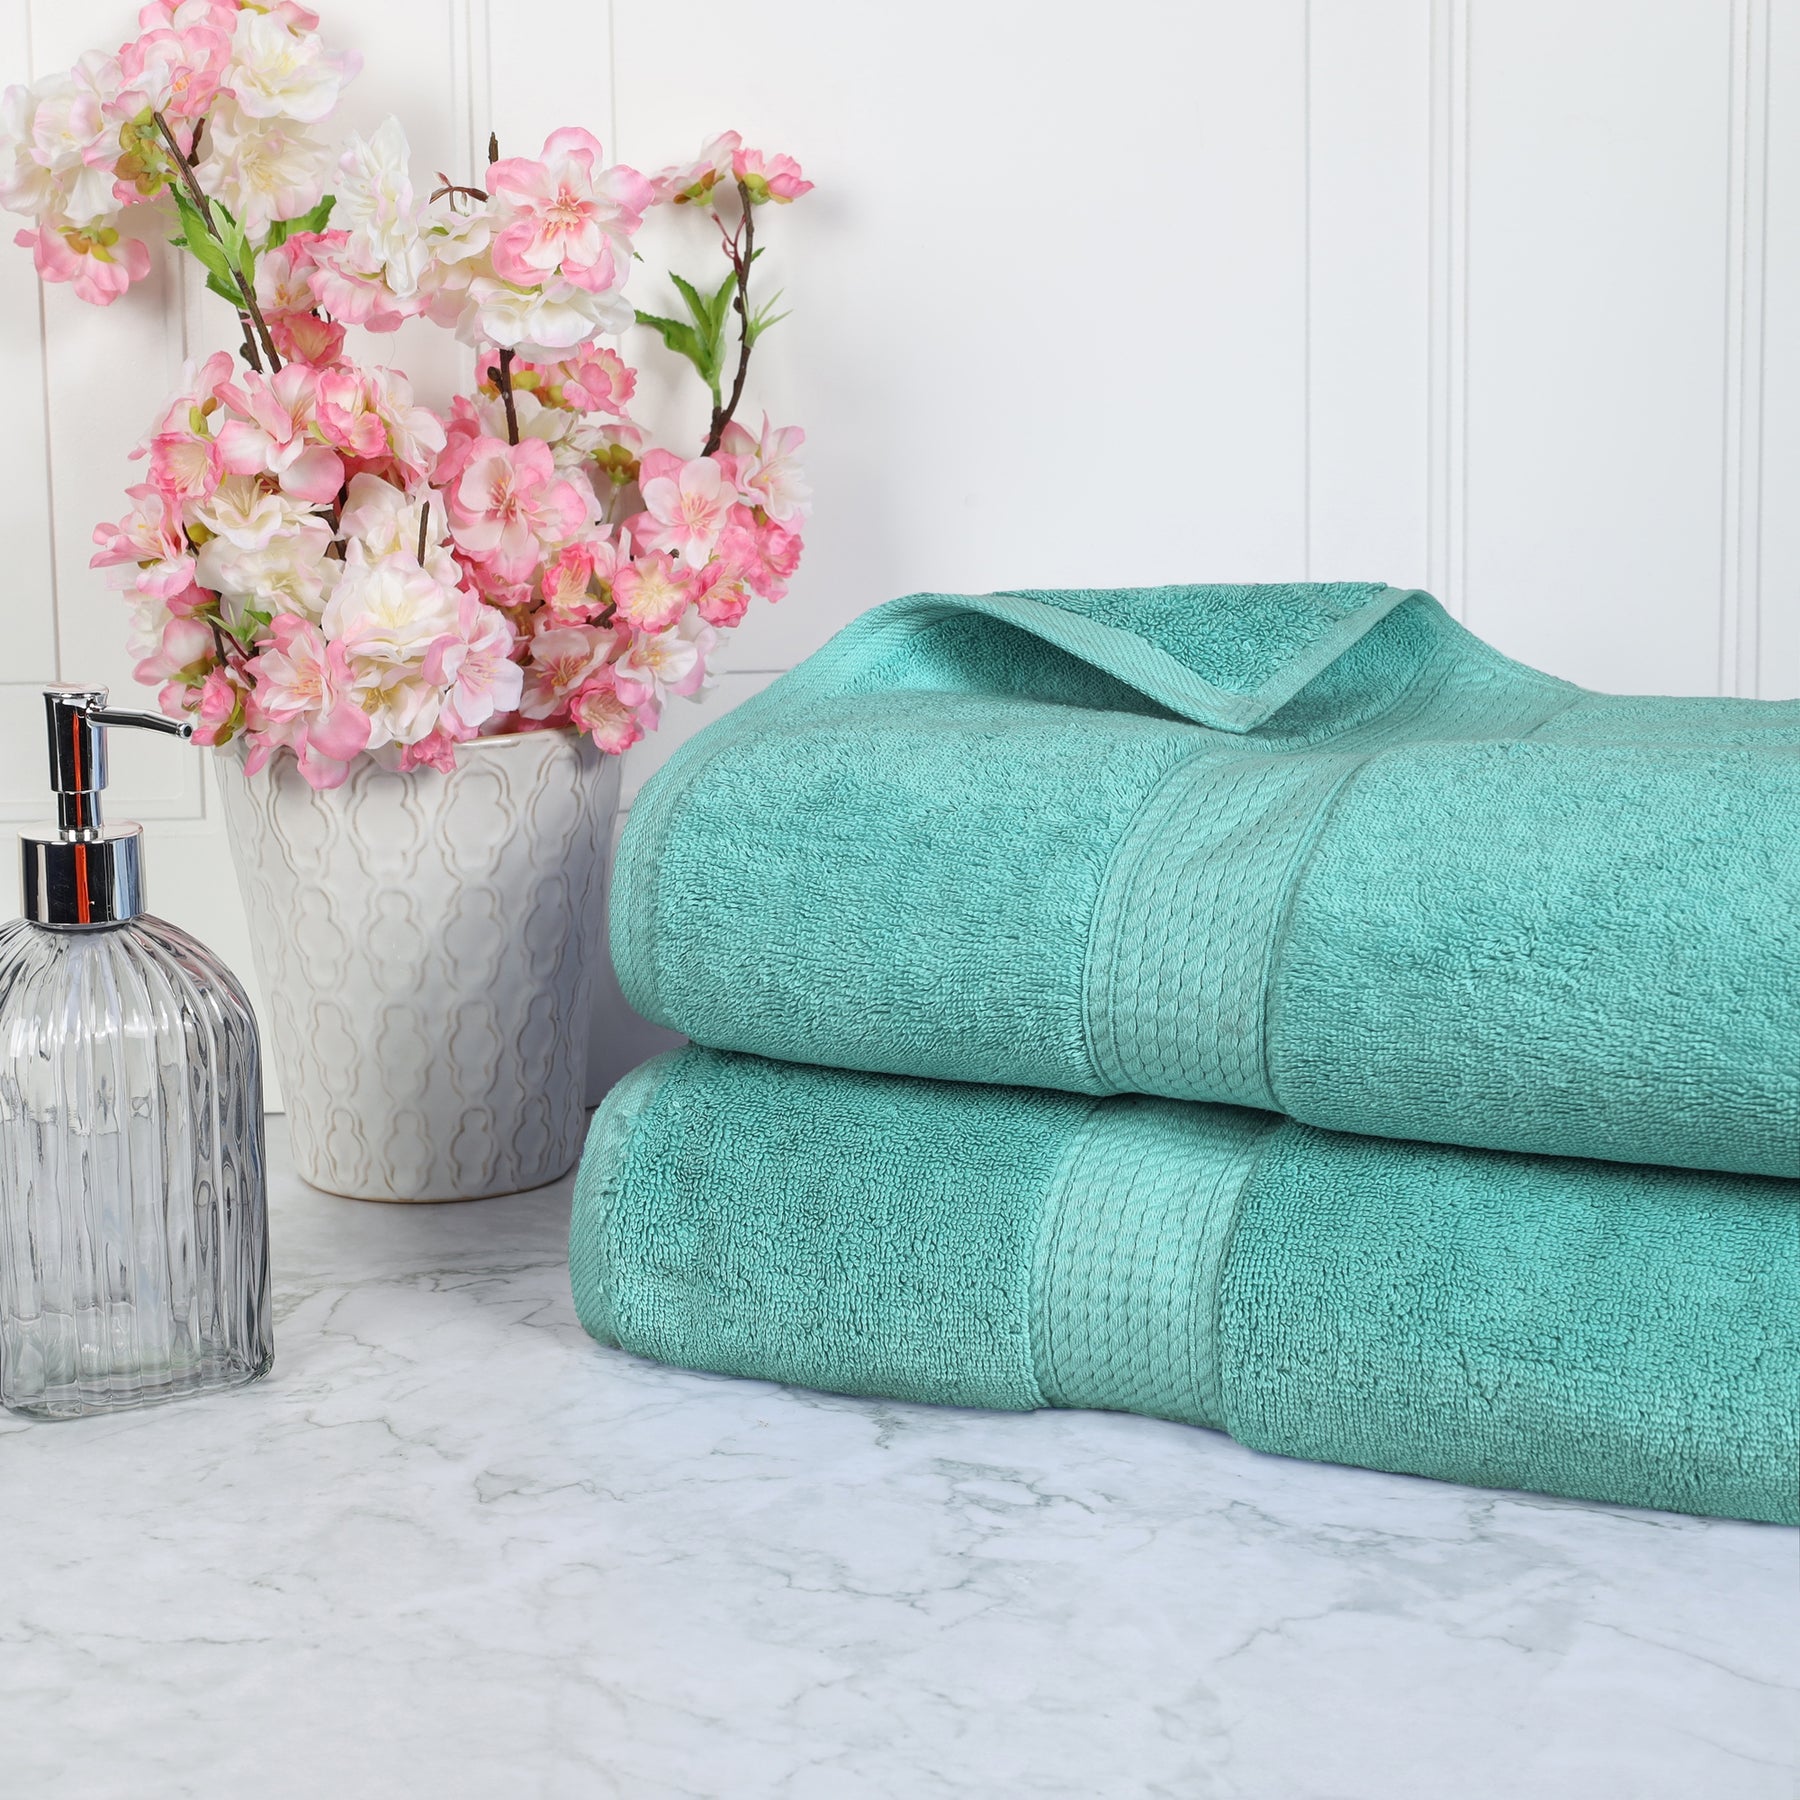 Egyptian Cotton Highly Absorbent 2 Piece Ultra-Plush Solid Bath Sheet Set - Turquoise